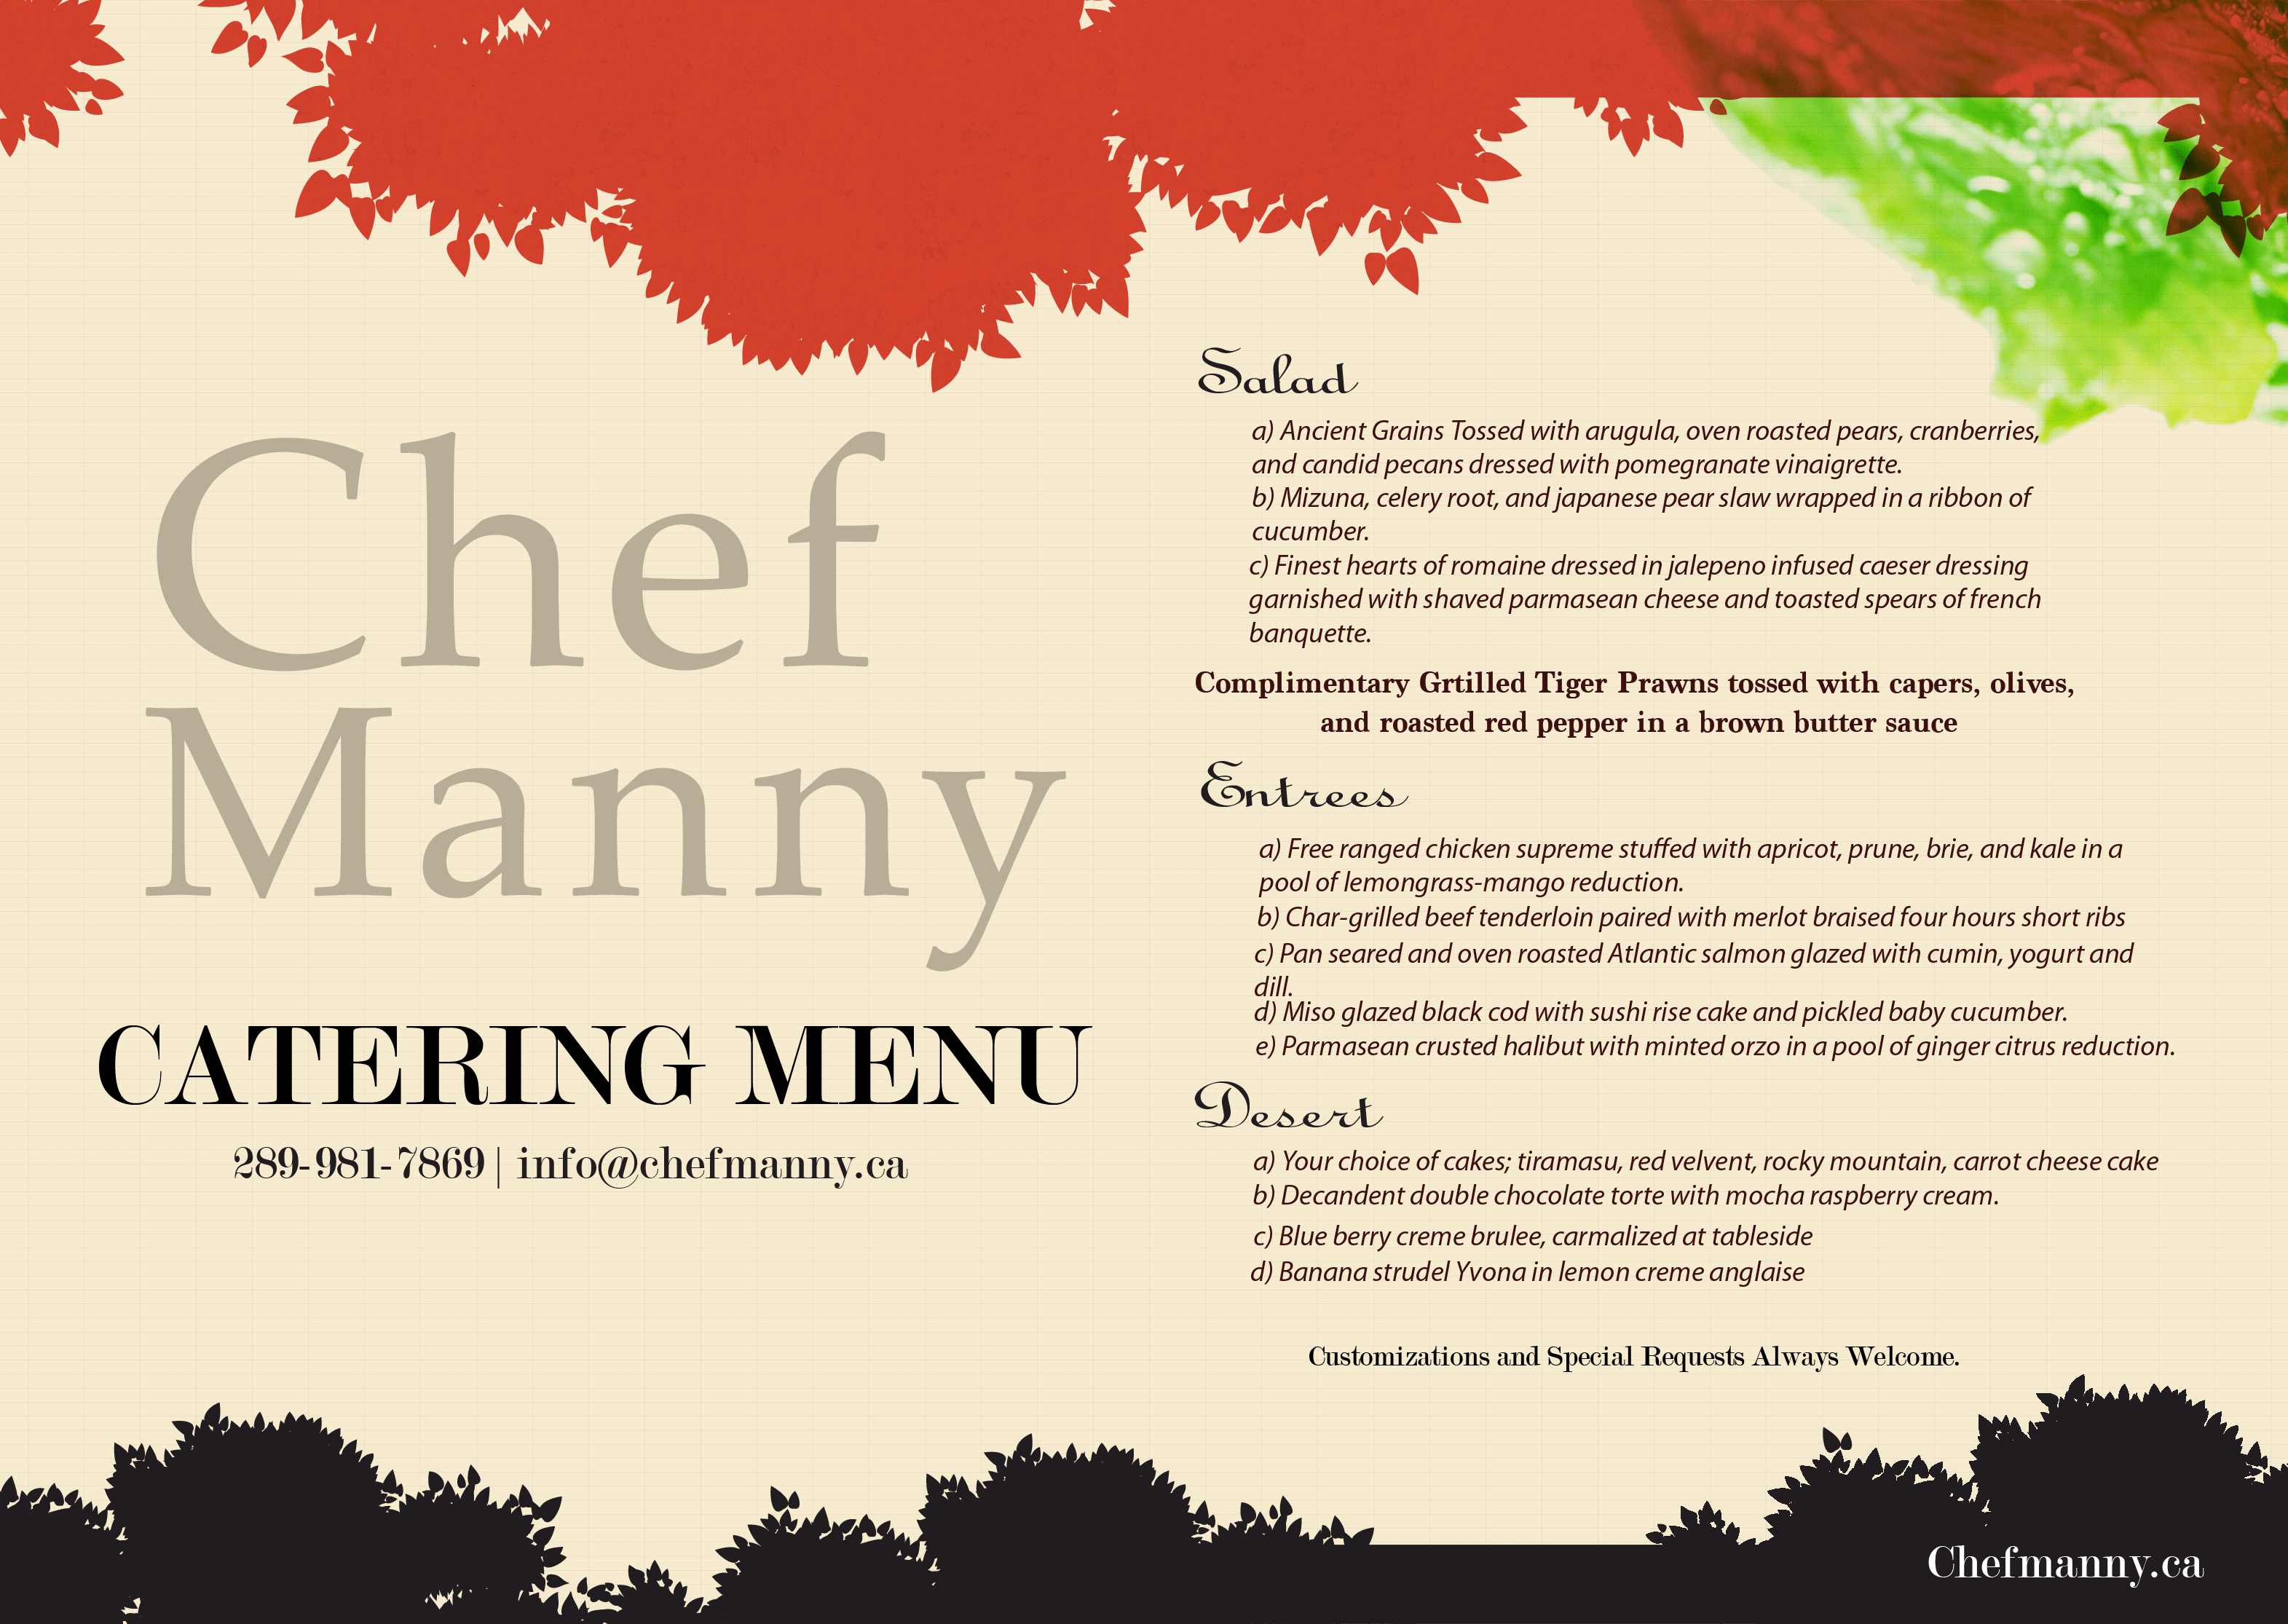 dinner chef private manny menu services catering parties